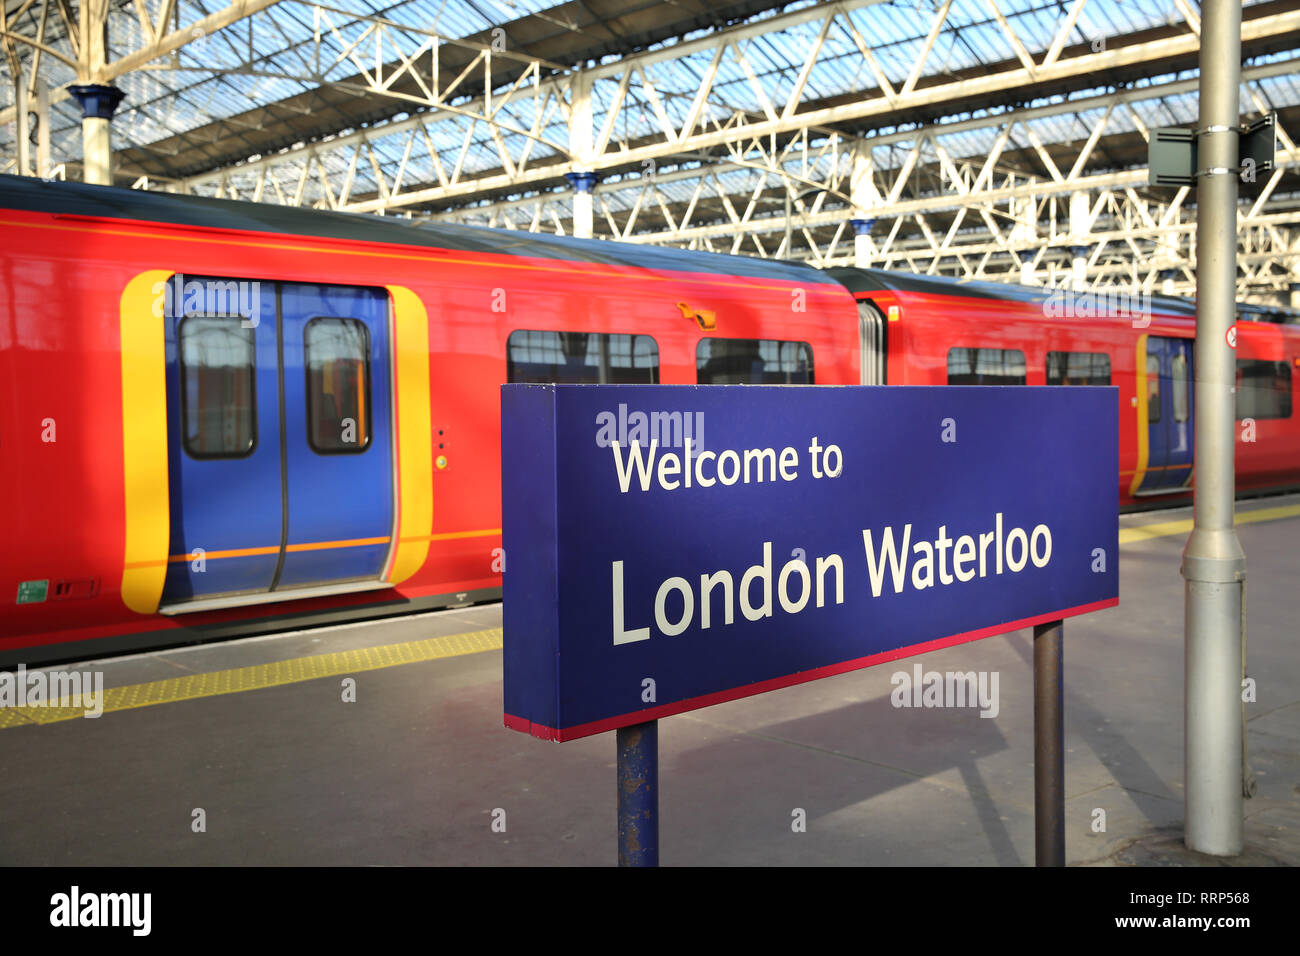 London Waterloo station with some trains in the background, England. Stock Photo